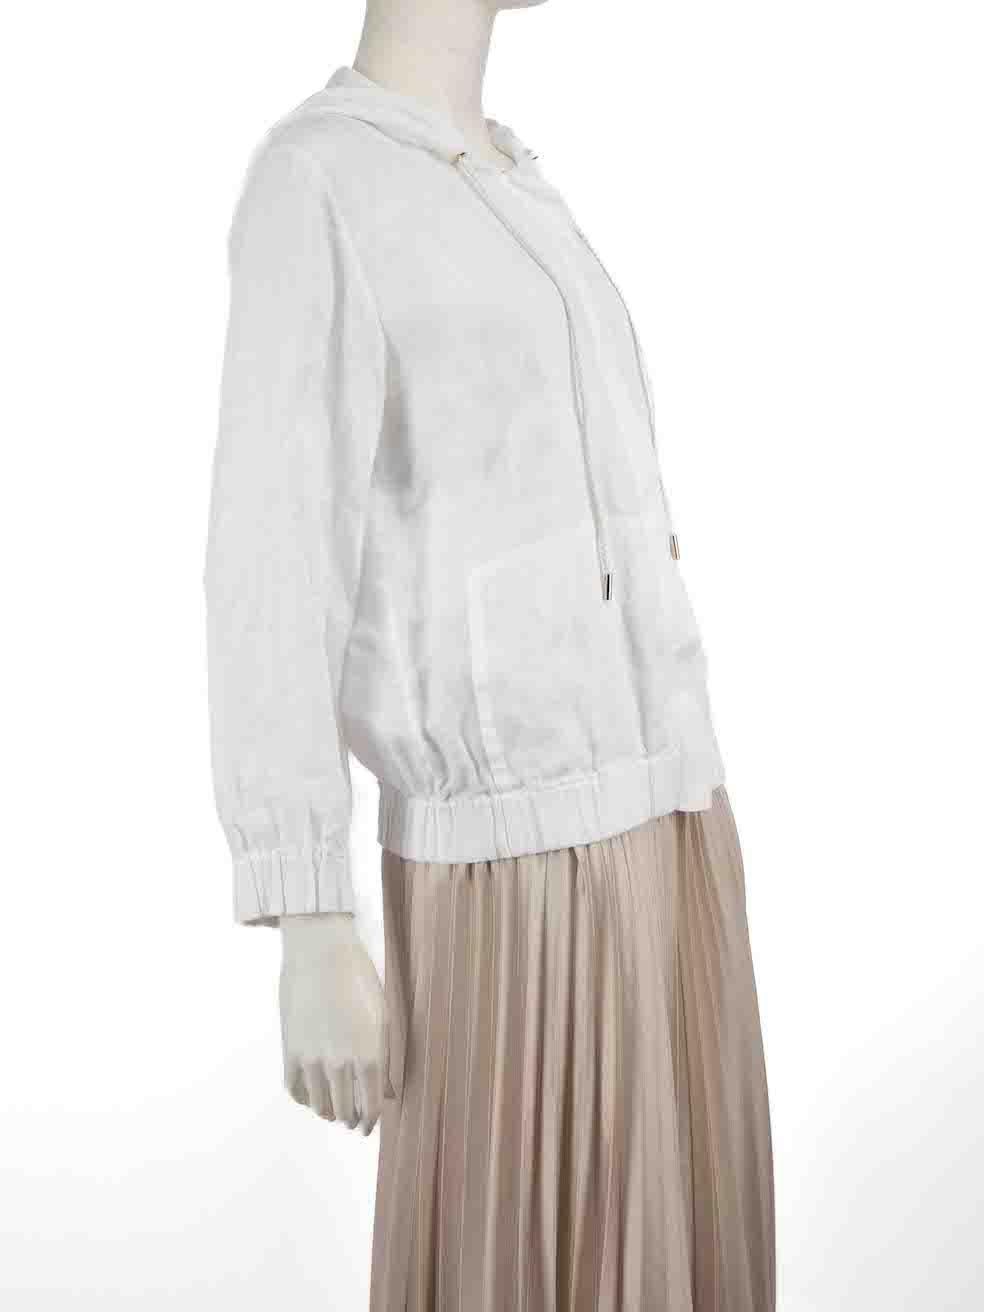 CONDITION is Very good. Hardly any visible wear to jacket is evident on this used La Perla designer resale item.
 
 Details
 White
 Linen
 Track jacket
 Drawstring hood
 Zip fastening
 Elasticated cuff and hem
 2x Side pockets
 Sheer
 
 
 Made in